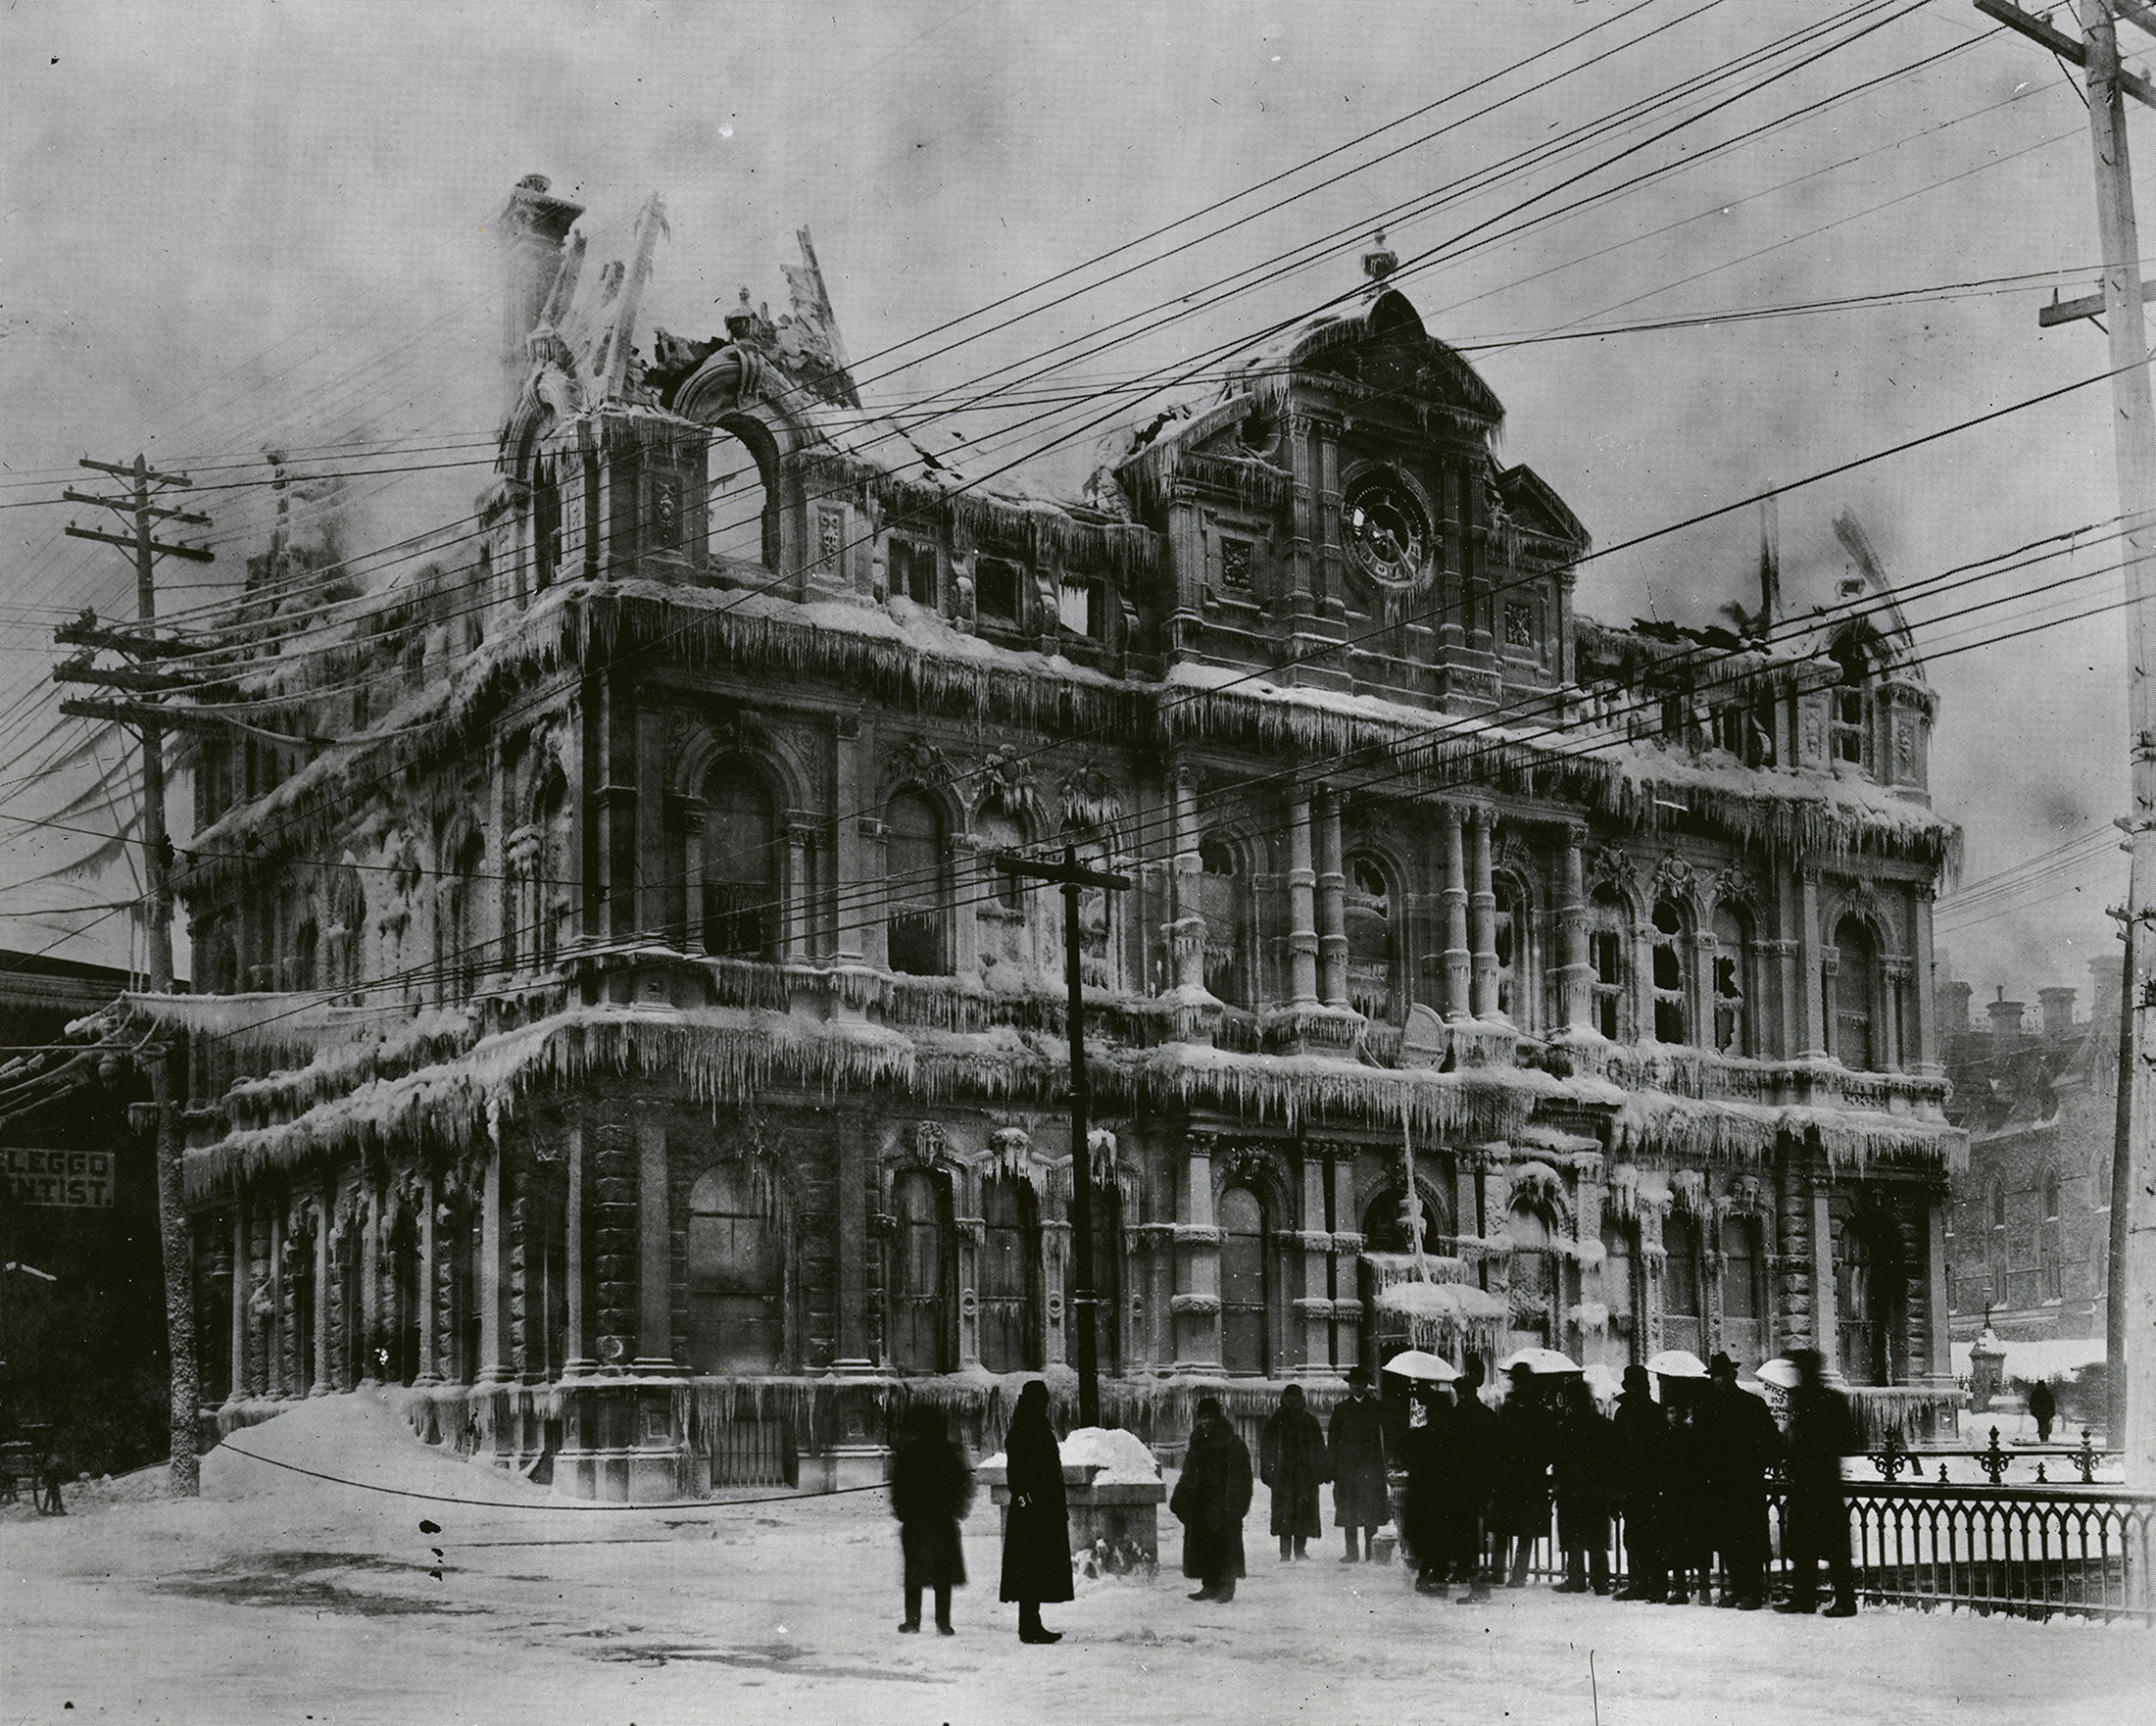 Central Post Office Destroyed by Fire, 1904, photograph